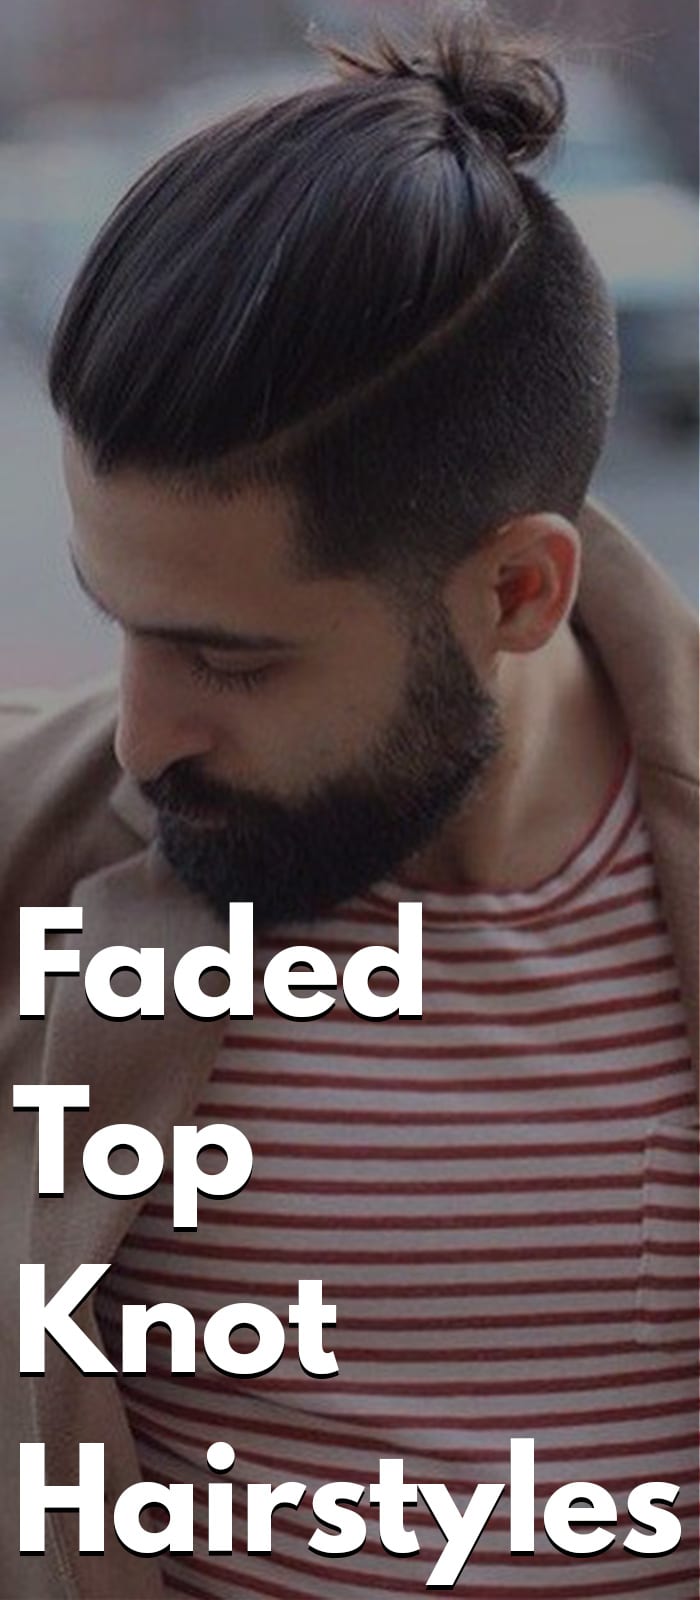 Faded Top Knot Hairstyles